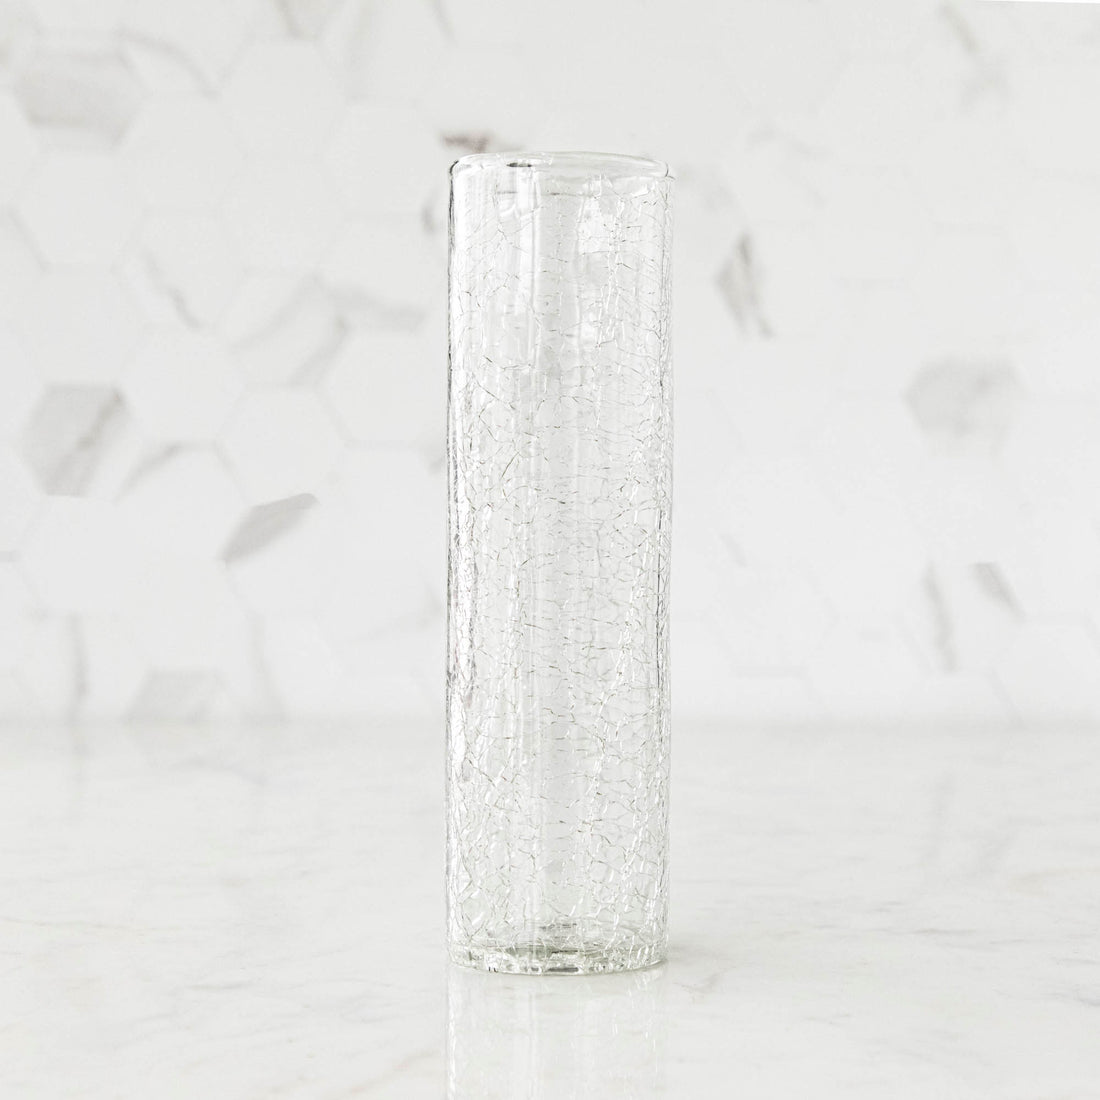 A tall Norwell Champagne Flute sitting on top of a marble counter.